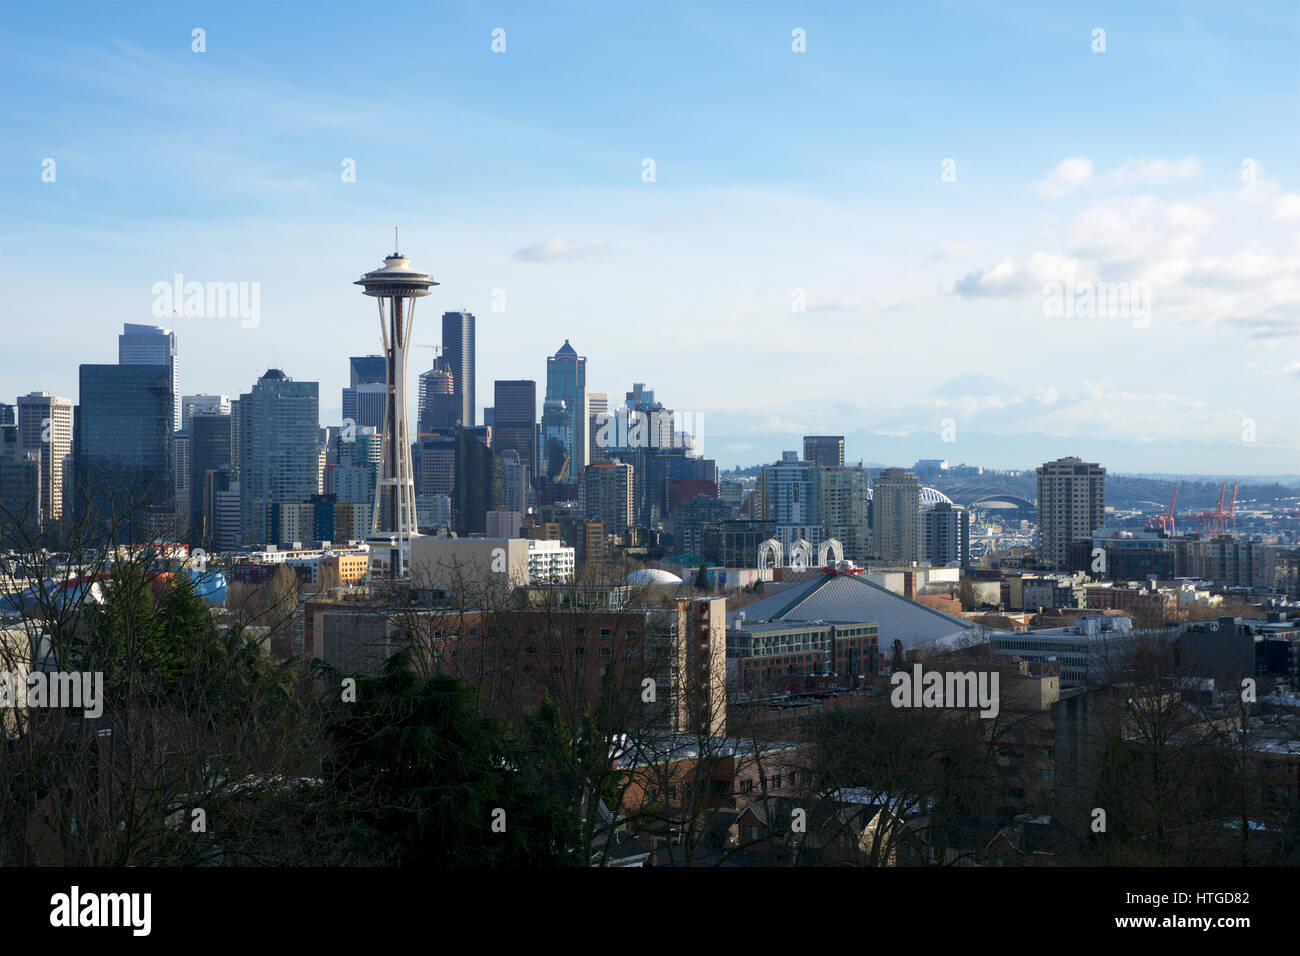 SEATTLE, WASHINGTON, USA - JAN 24th, 2017: Seattle skyline panorama seen from Kerry Park during the day light with Mount Rainier in the background. Se Stock Photo